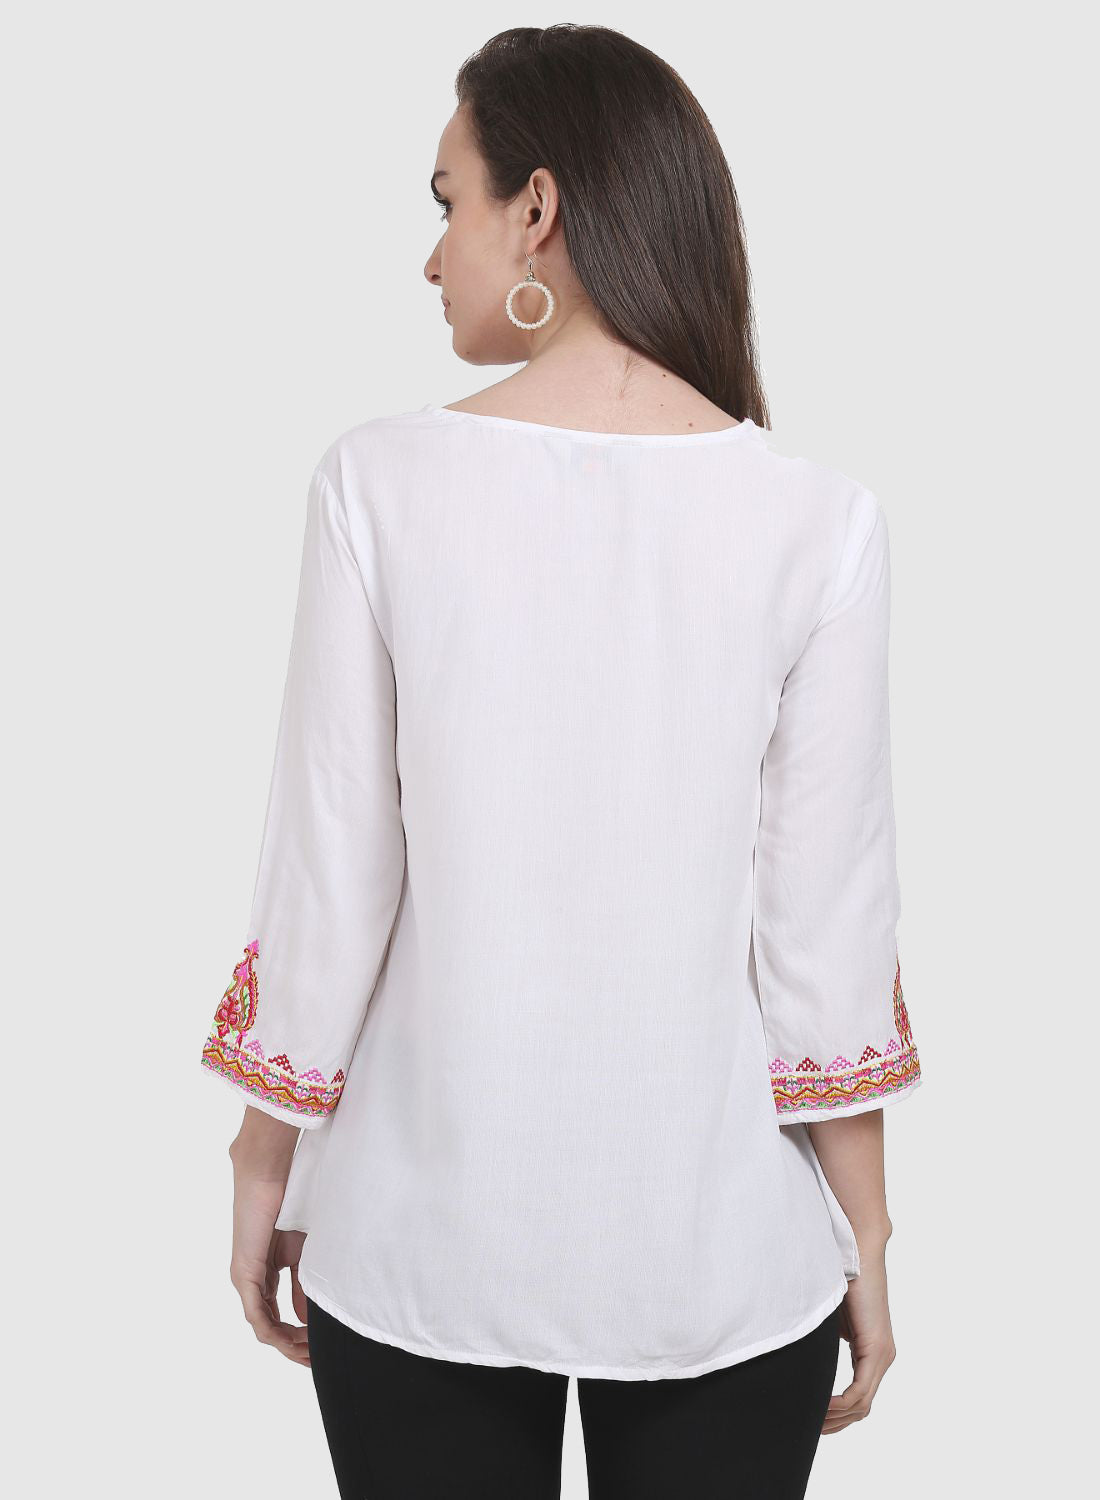 Women Top White Casual Regular Fit 3/4 Sleeve Embroidery Work